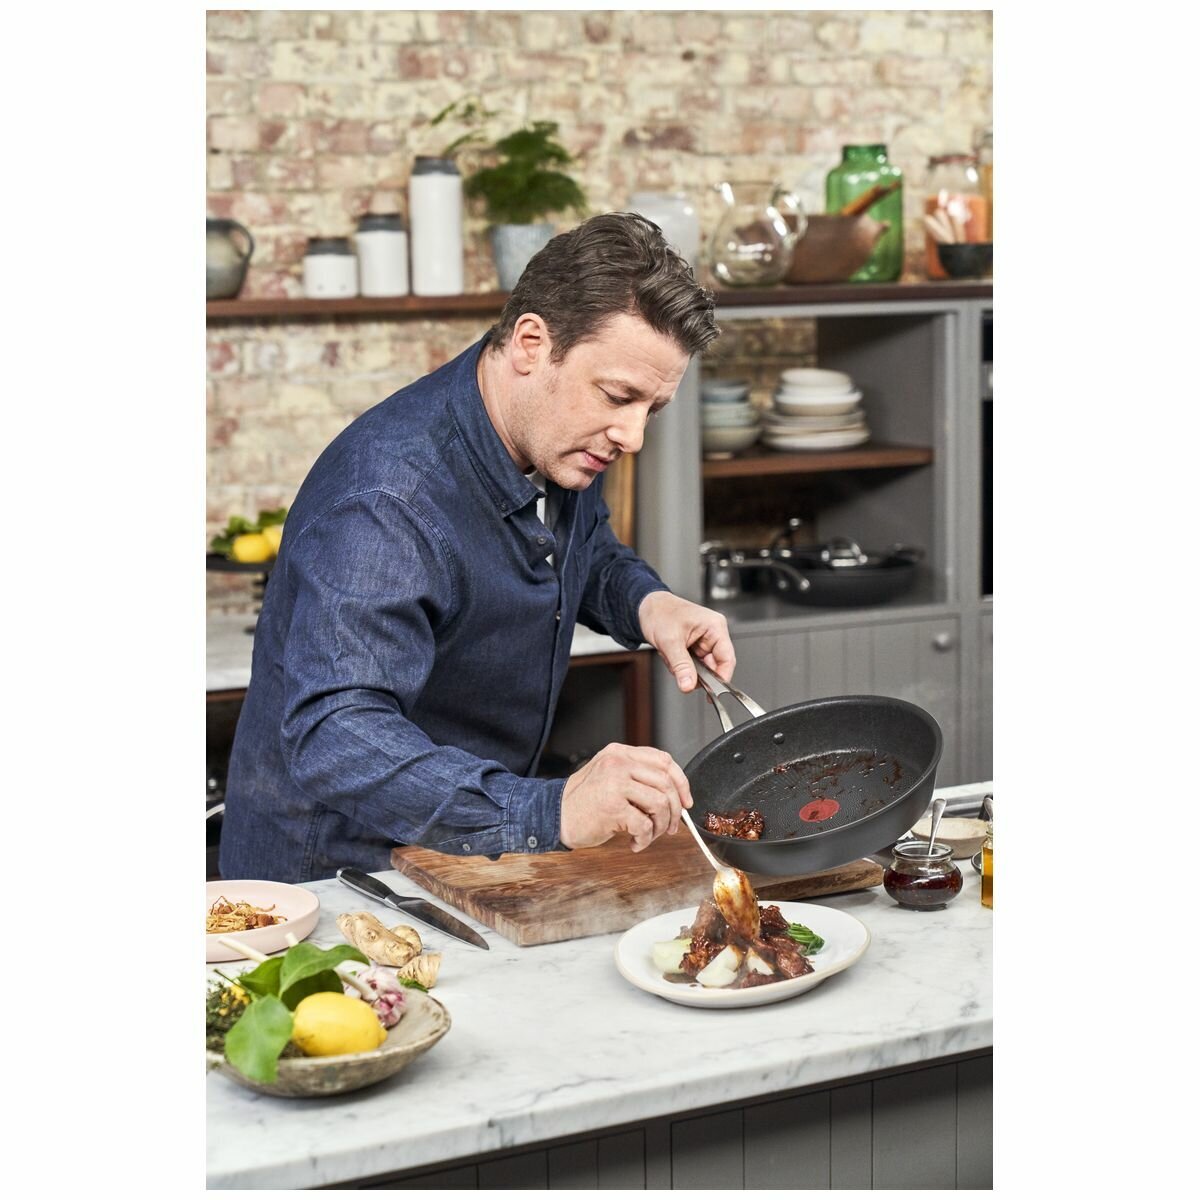 https://www.winnings.com.au/ak/1/8/2/b/182b5981ad58048b306ac54654ac3ad27de56005_tefal_30cm_jamie_oliver_cooks_classics_induction_non_stick_hard_anodised_frypan_h9120744_4_7f8b-high.jpeg